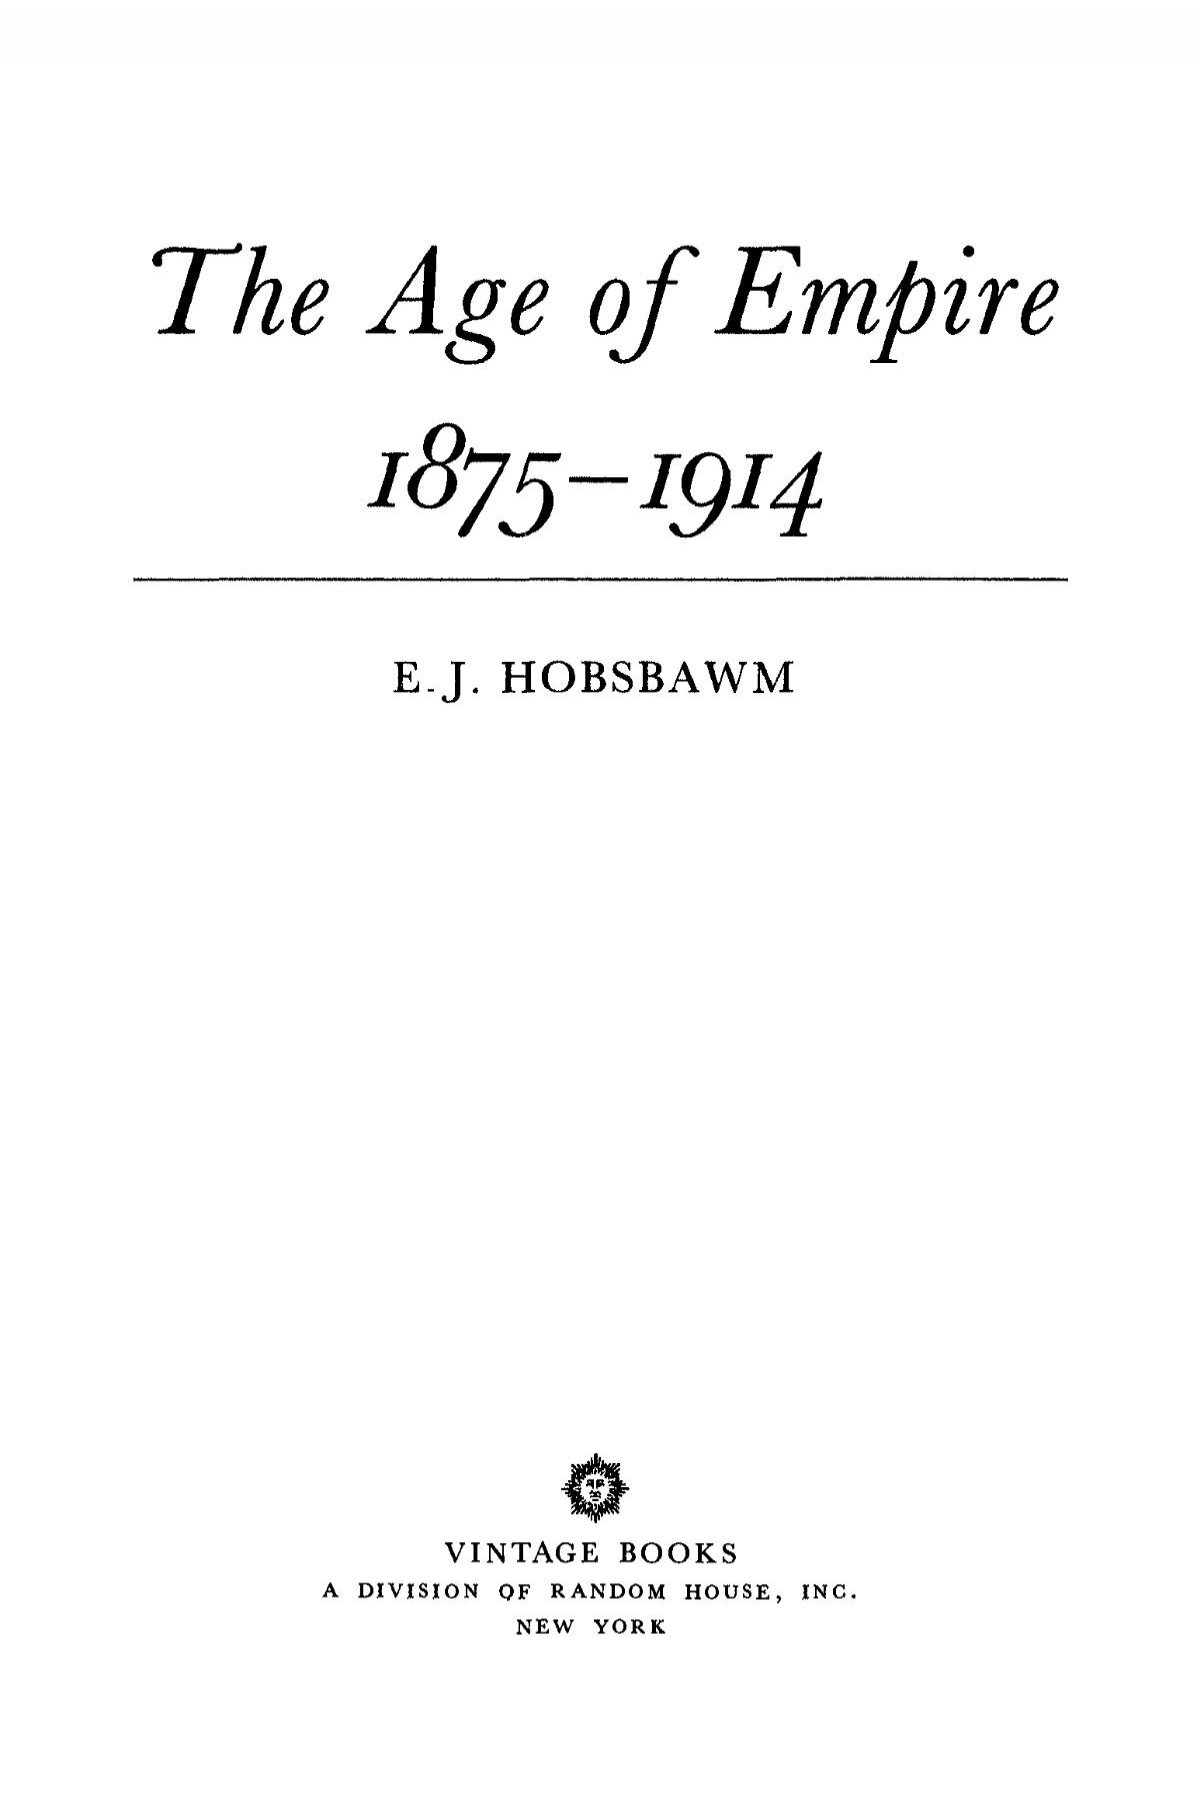 Eric Hobsbawm - Age Of Empire 1875 - 1914